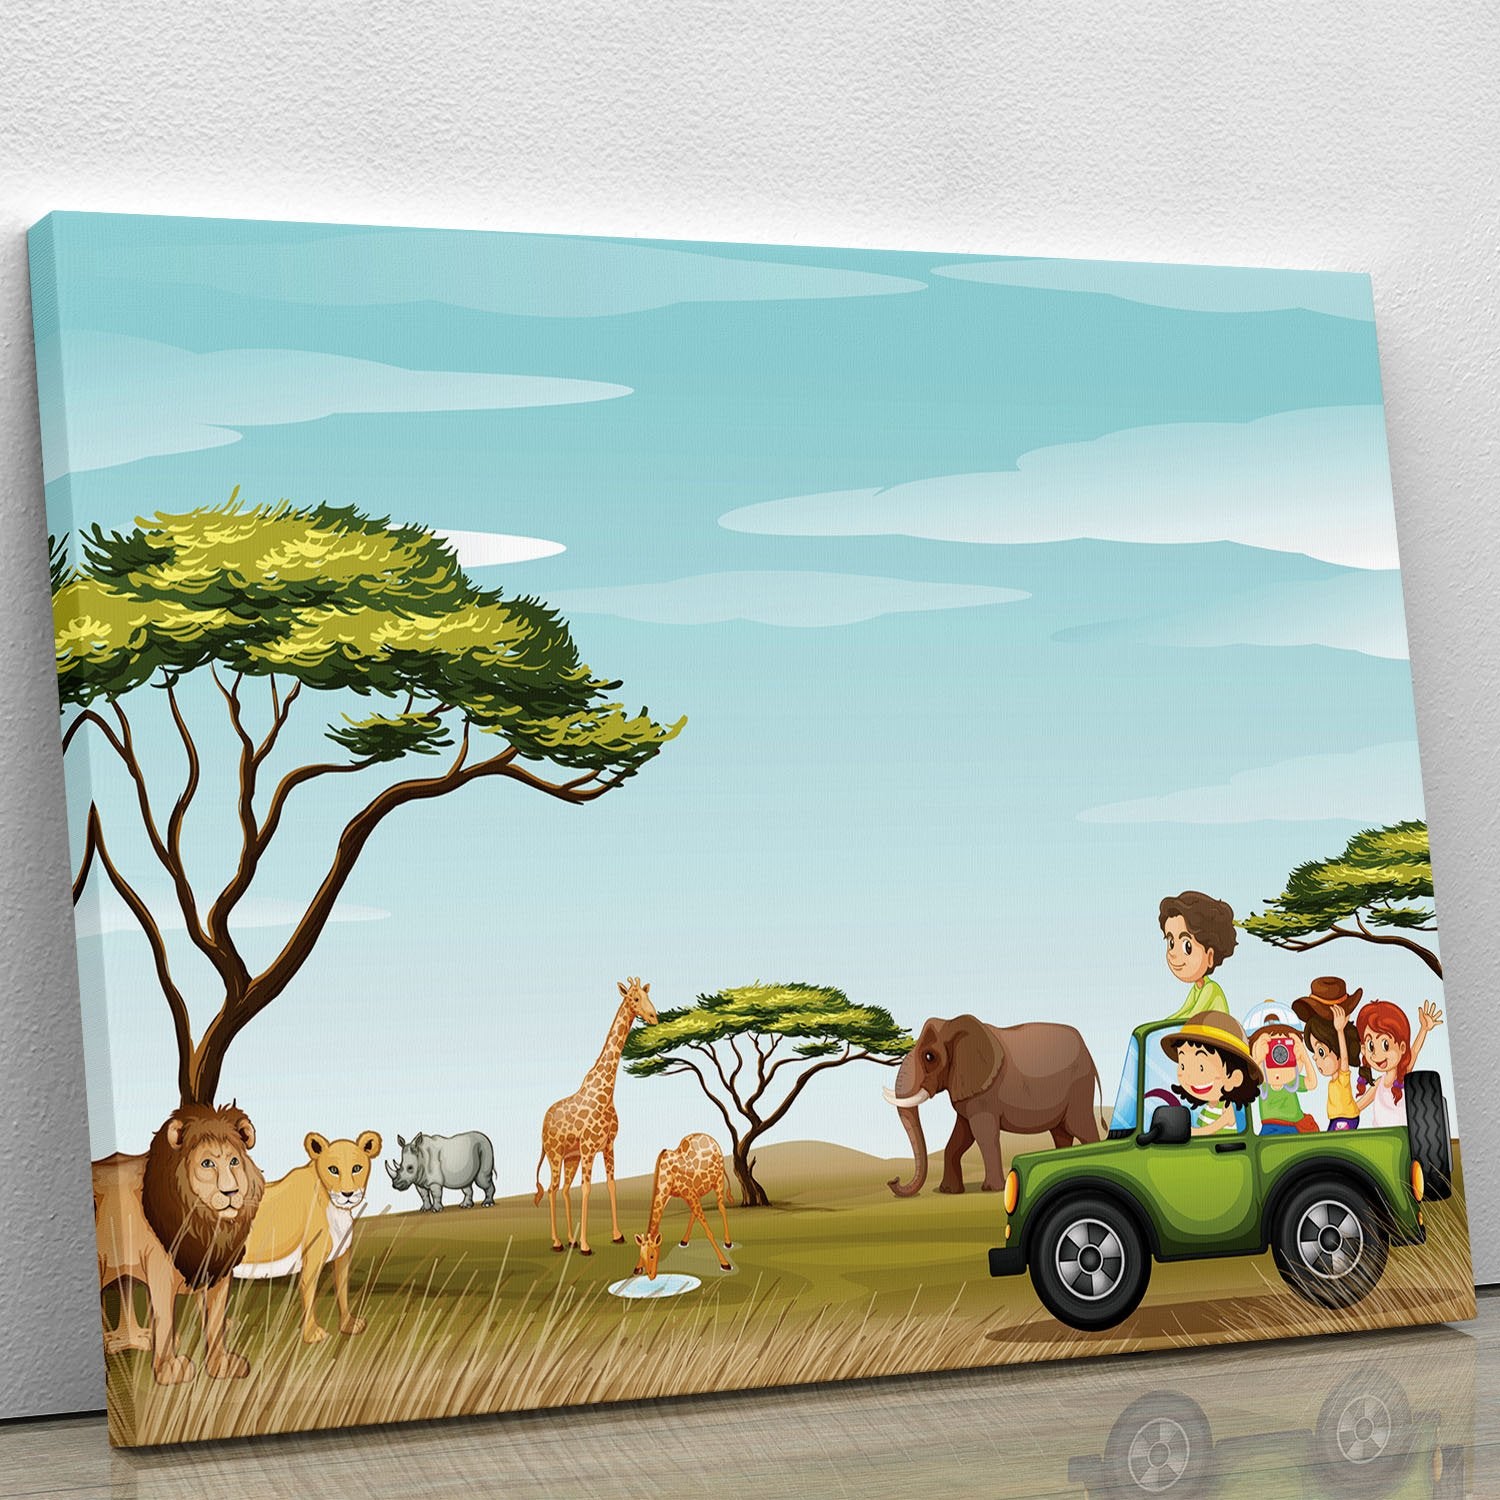 Roadtrip in the field full of animals Canvas Print or Poster